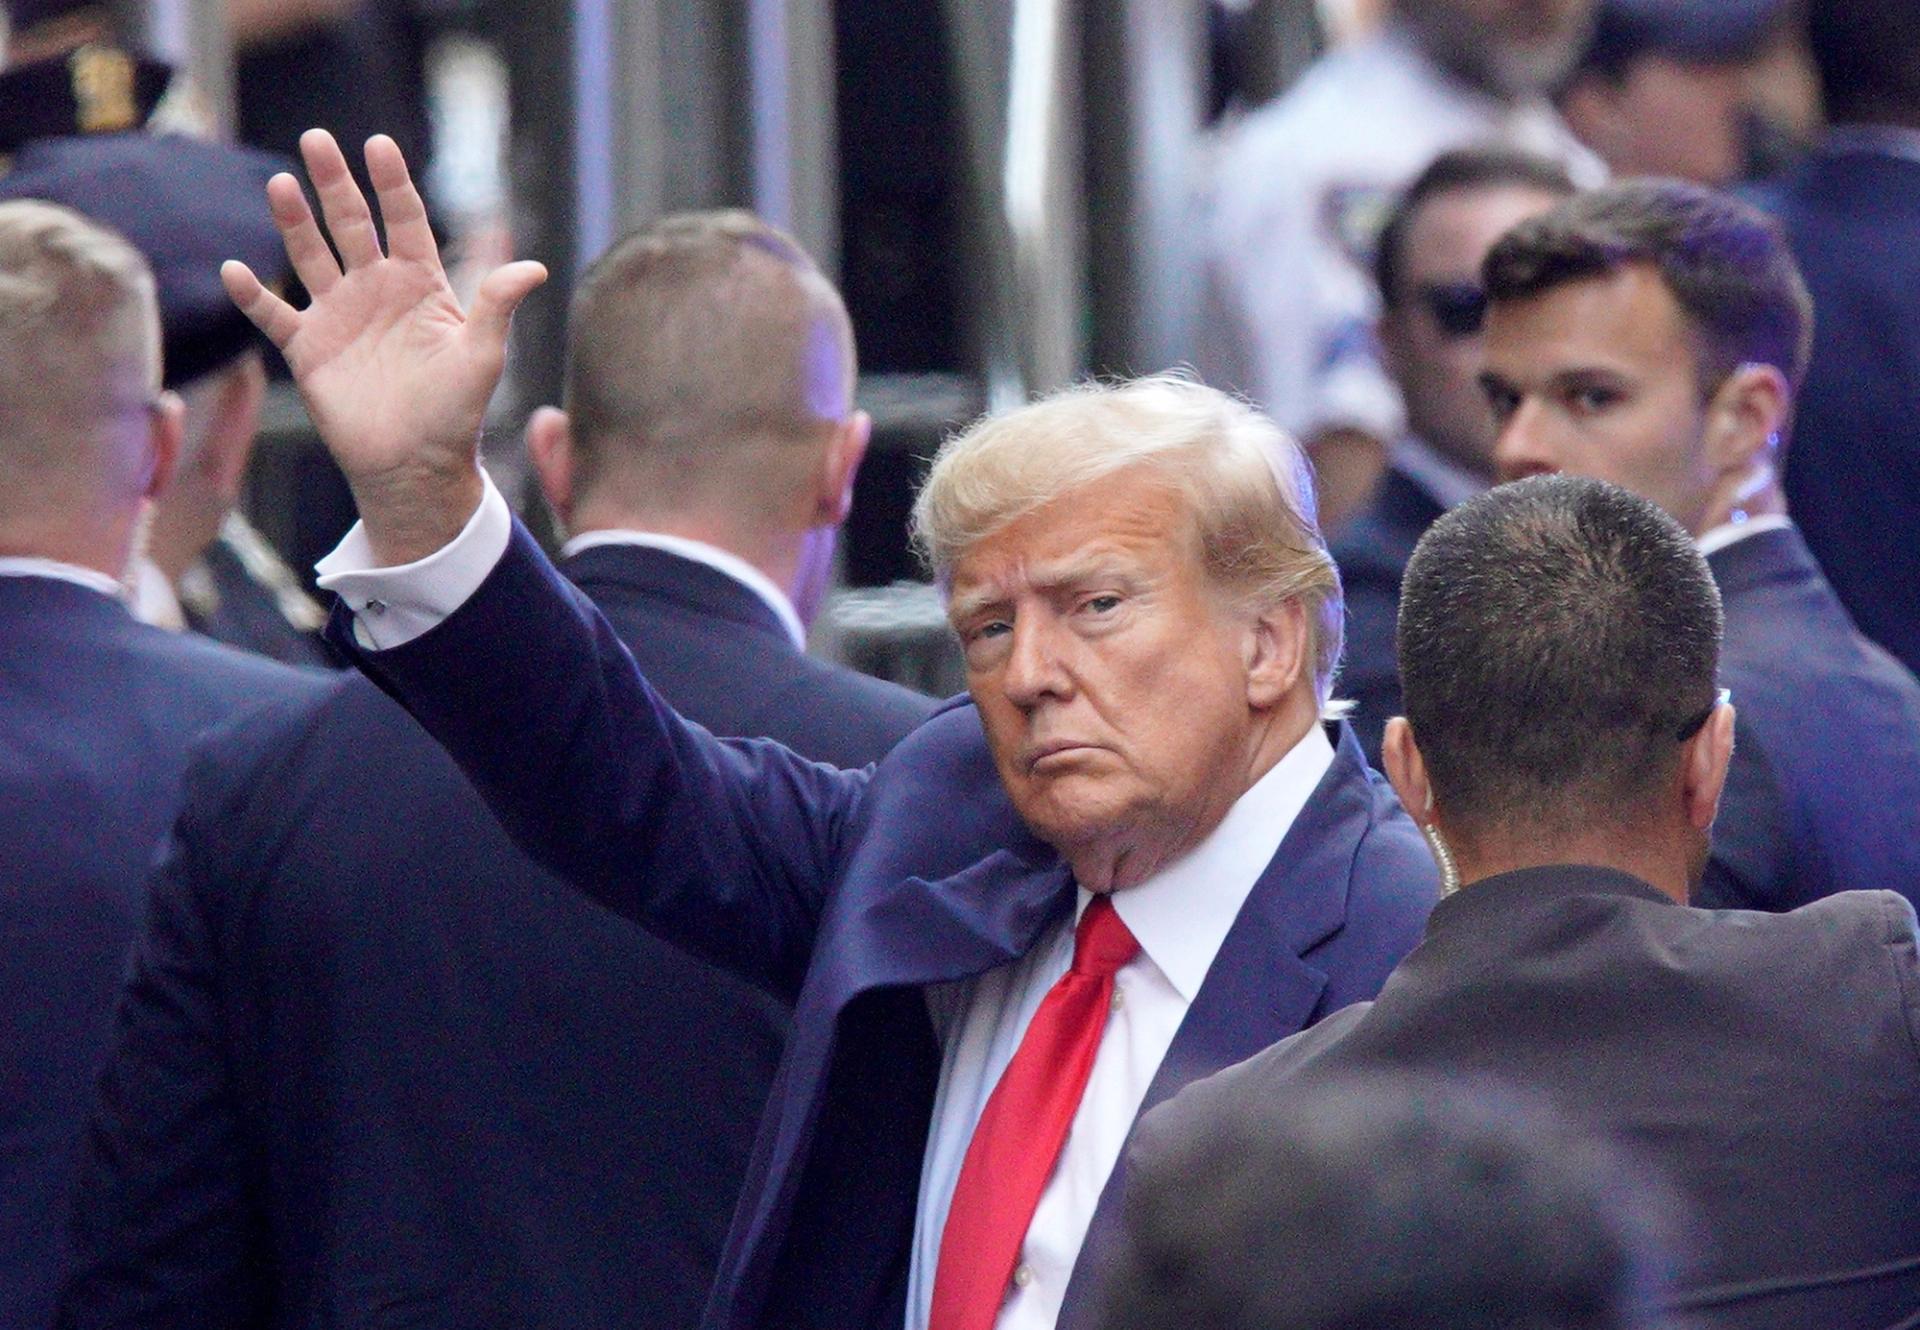 Trump waves to supporters before turning himself 